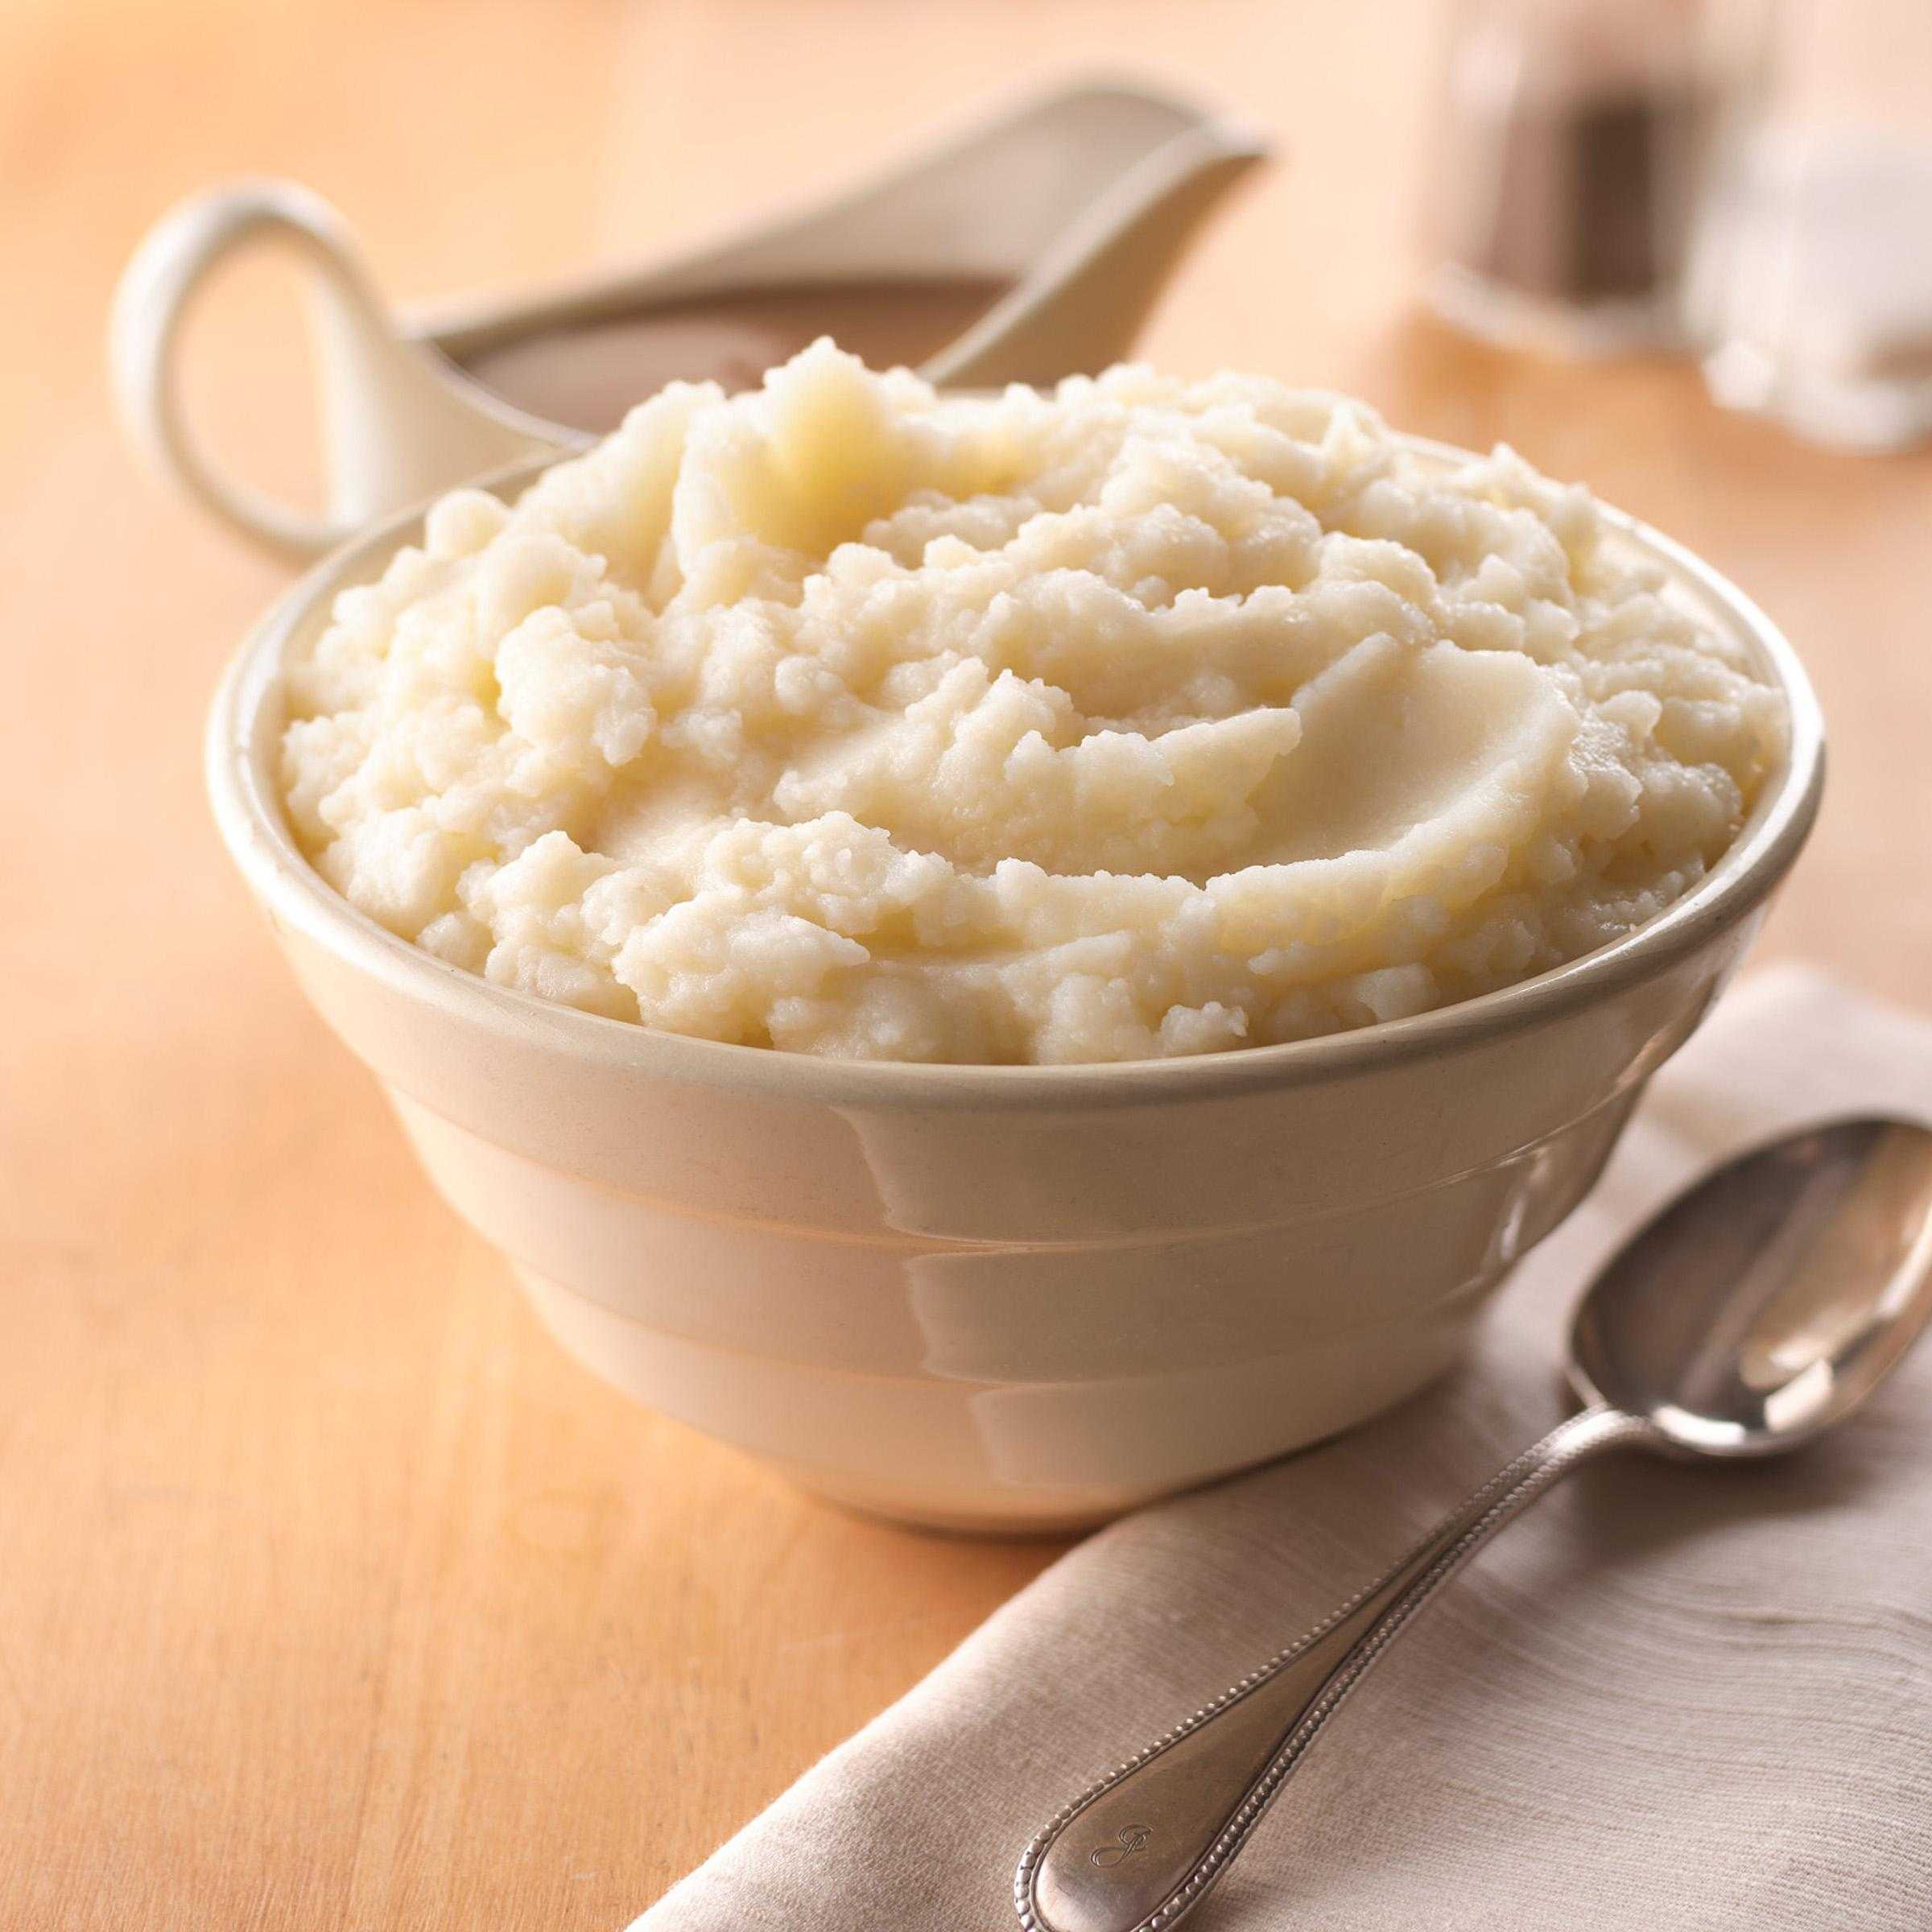 Simply Potatoes, Refrigerated Traditional Mashed Potatoes, peeled Russet potatoes, 6/6 Lb Bags